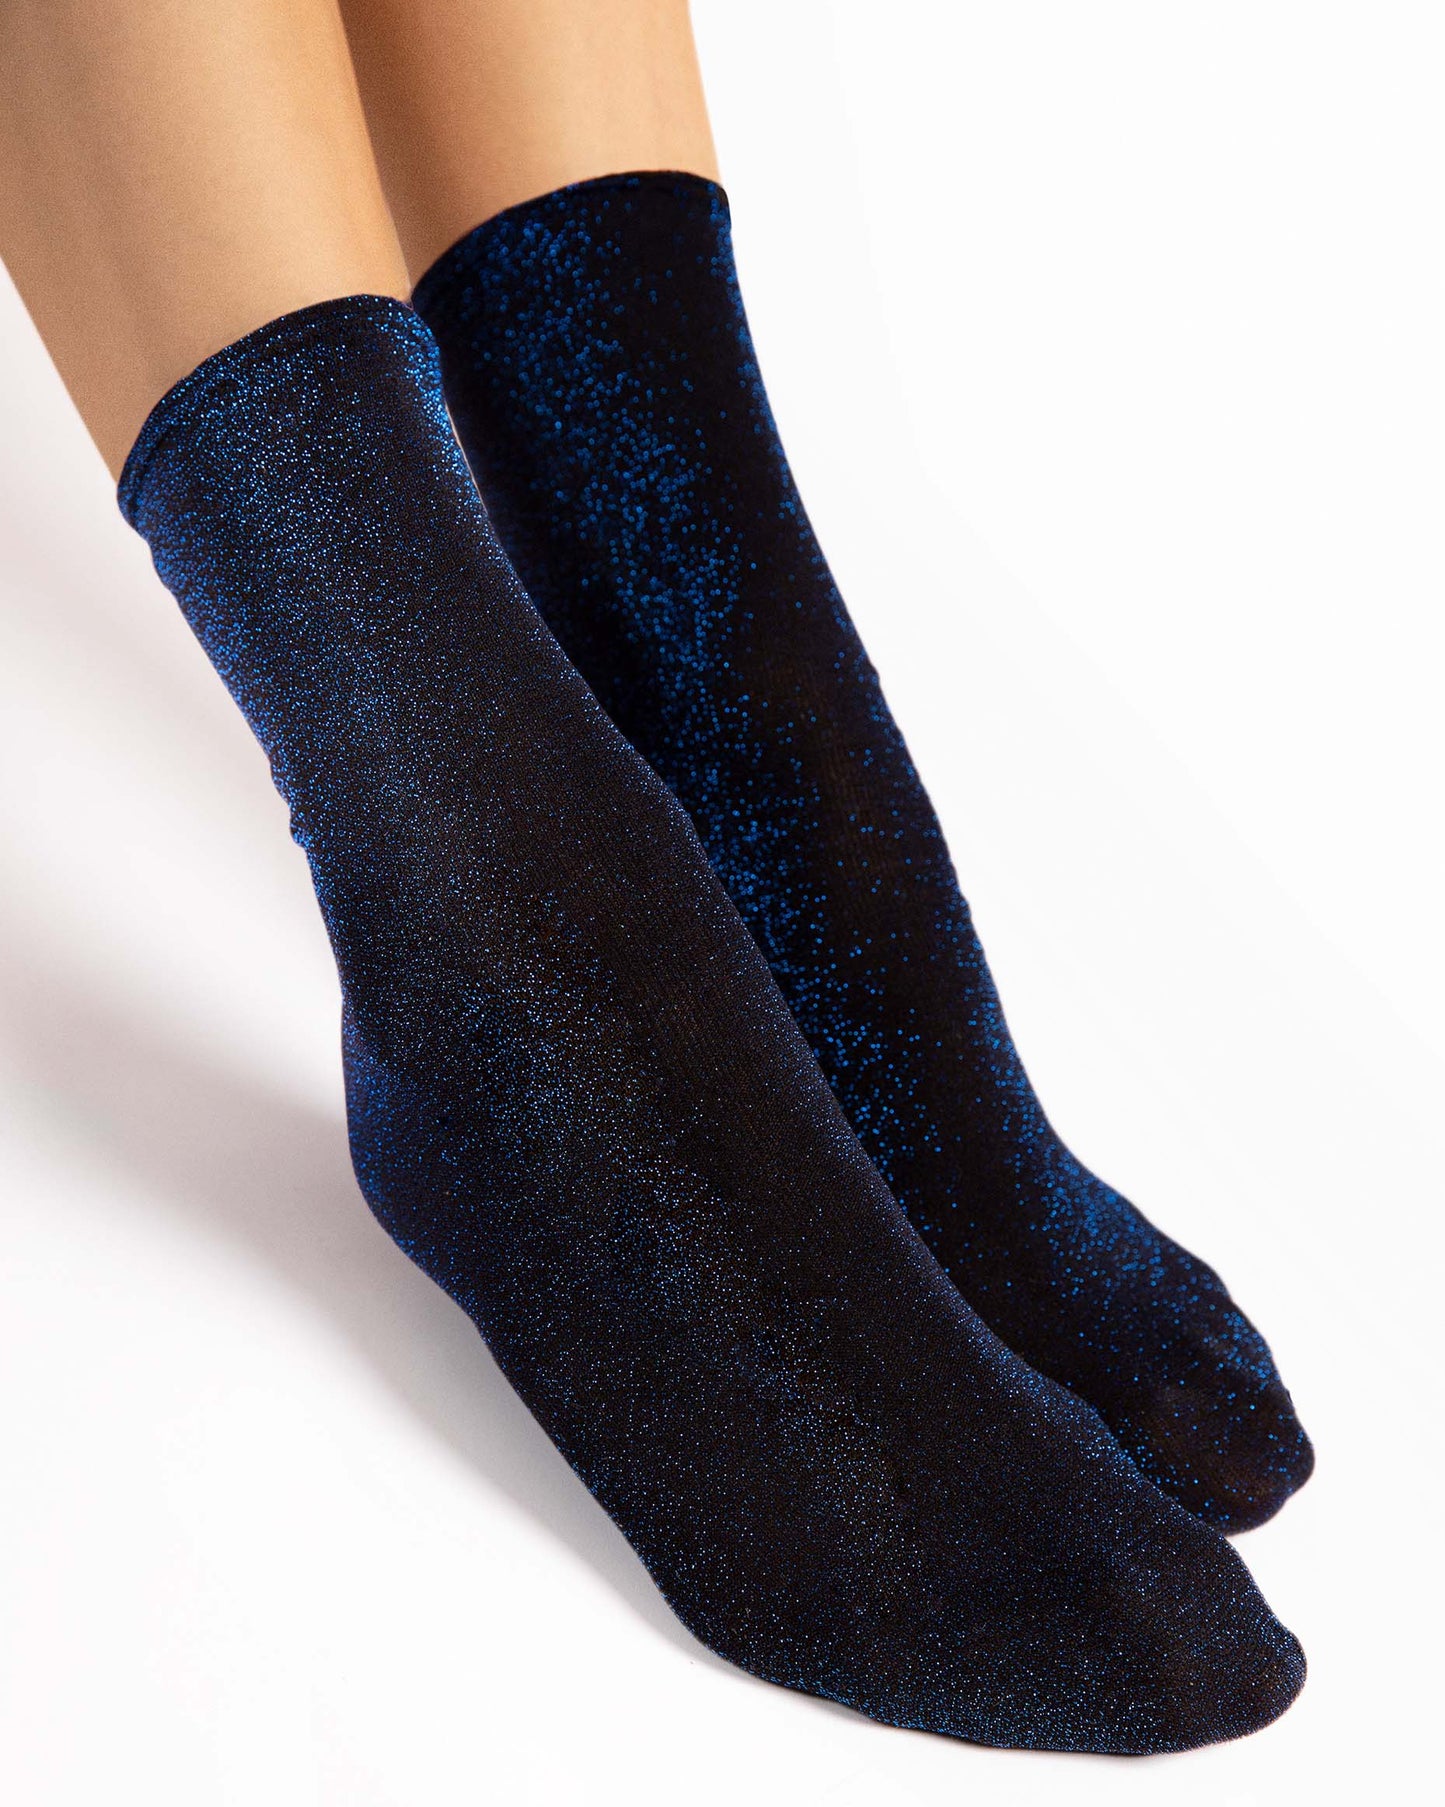 Fiore Bestie Socks - Black opaque tube ankle socks with sparkly blue lurex woven throughout.